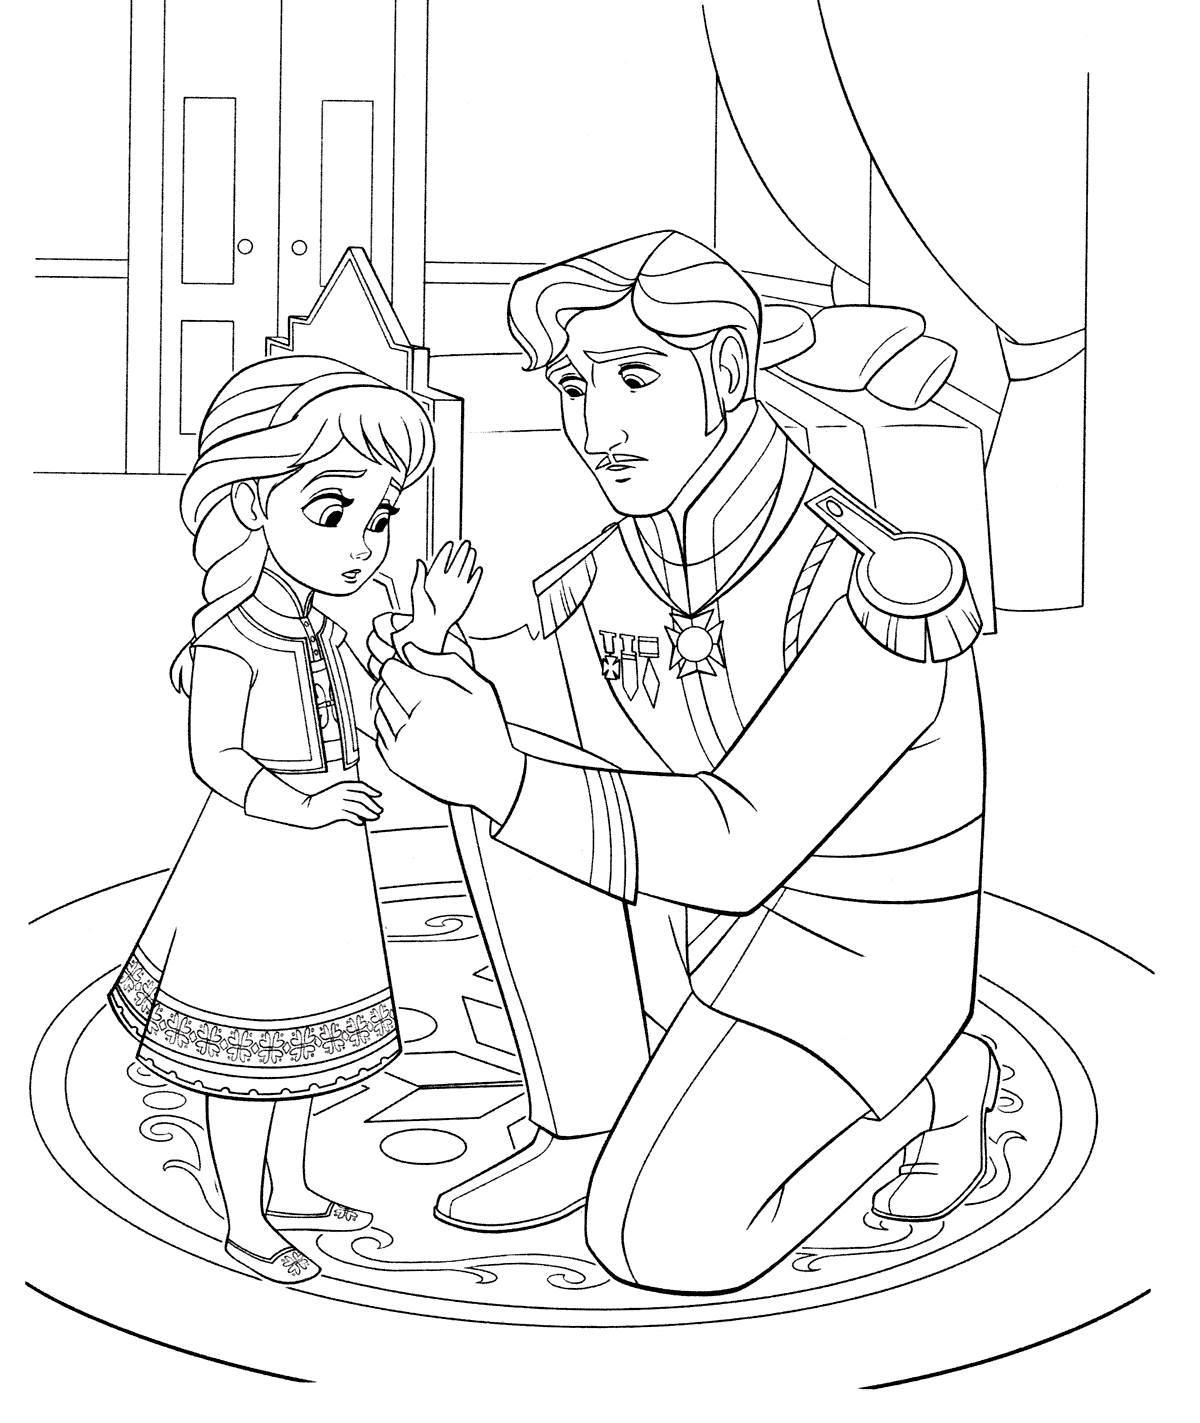 Elsa and father